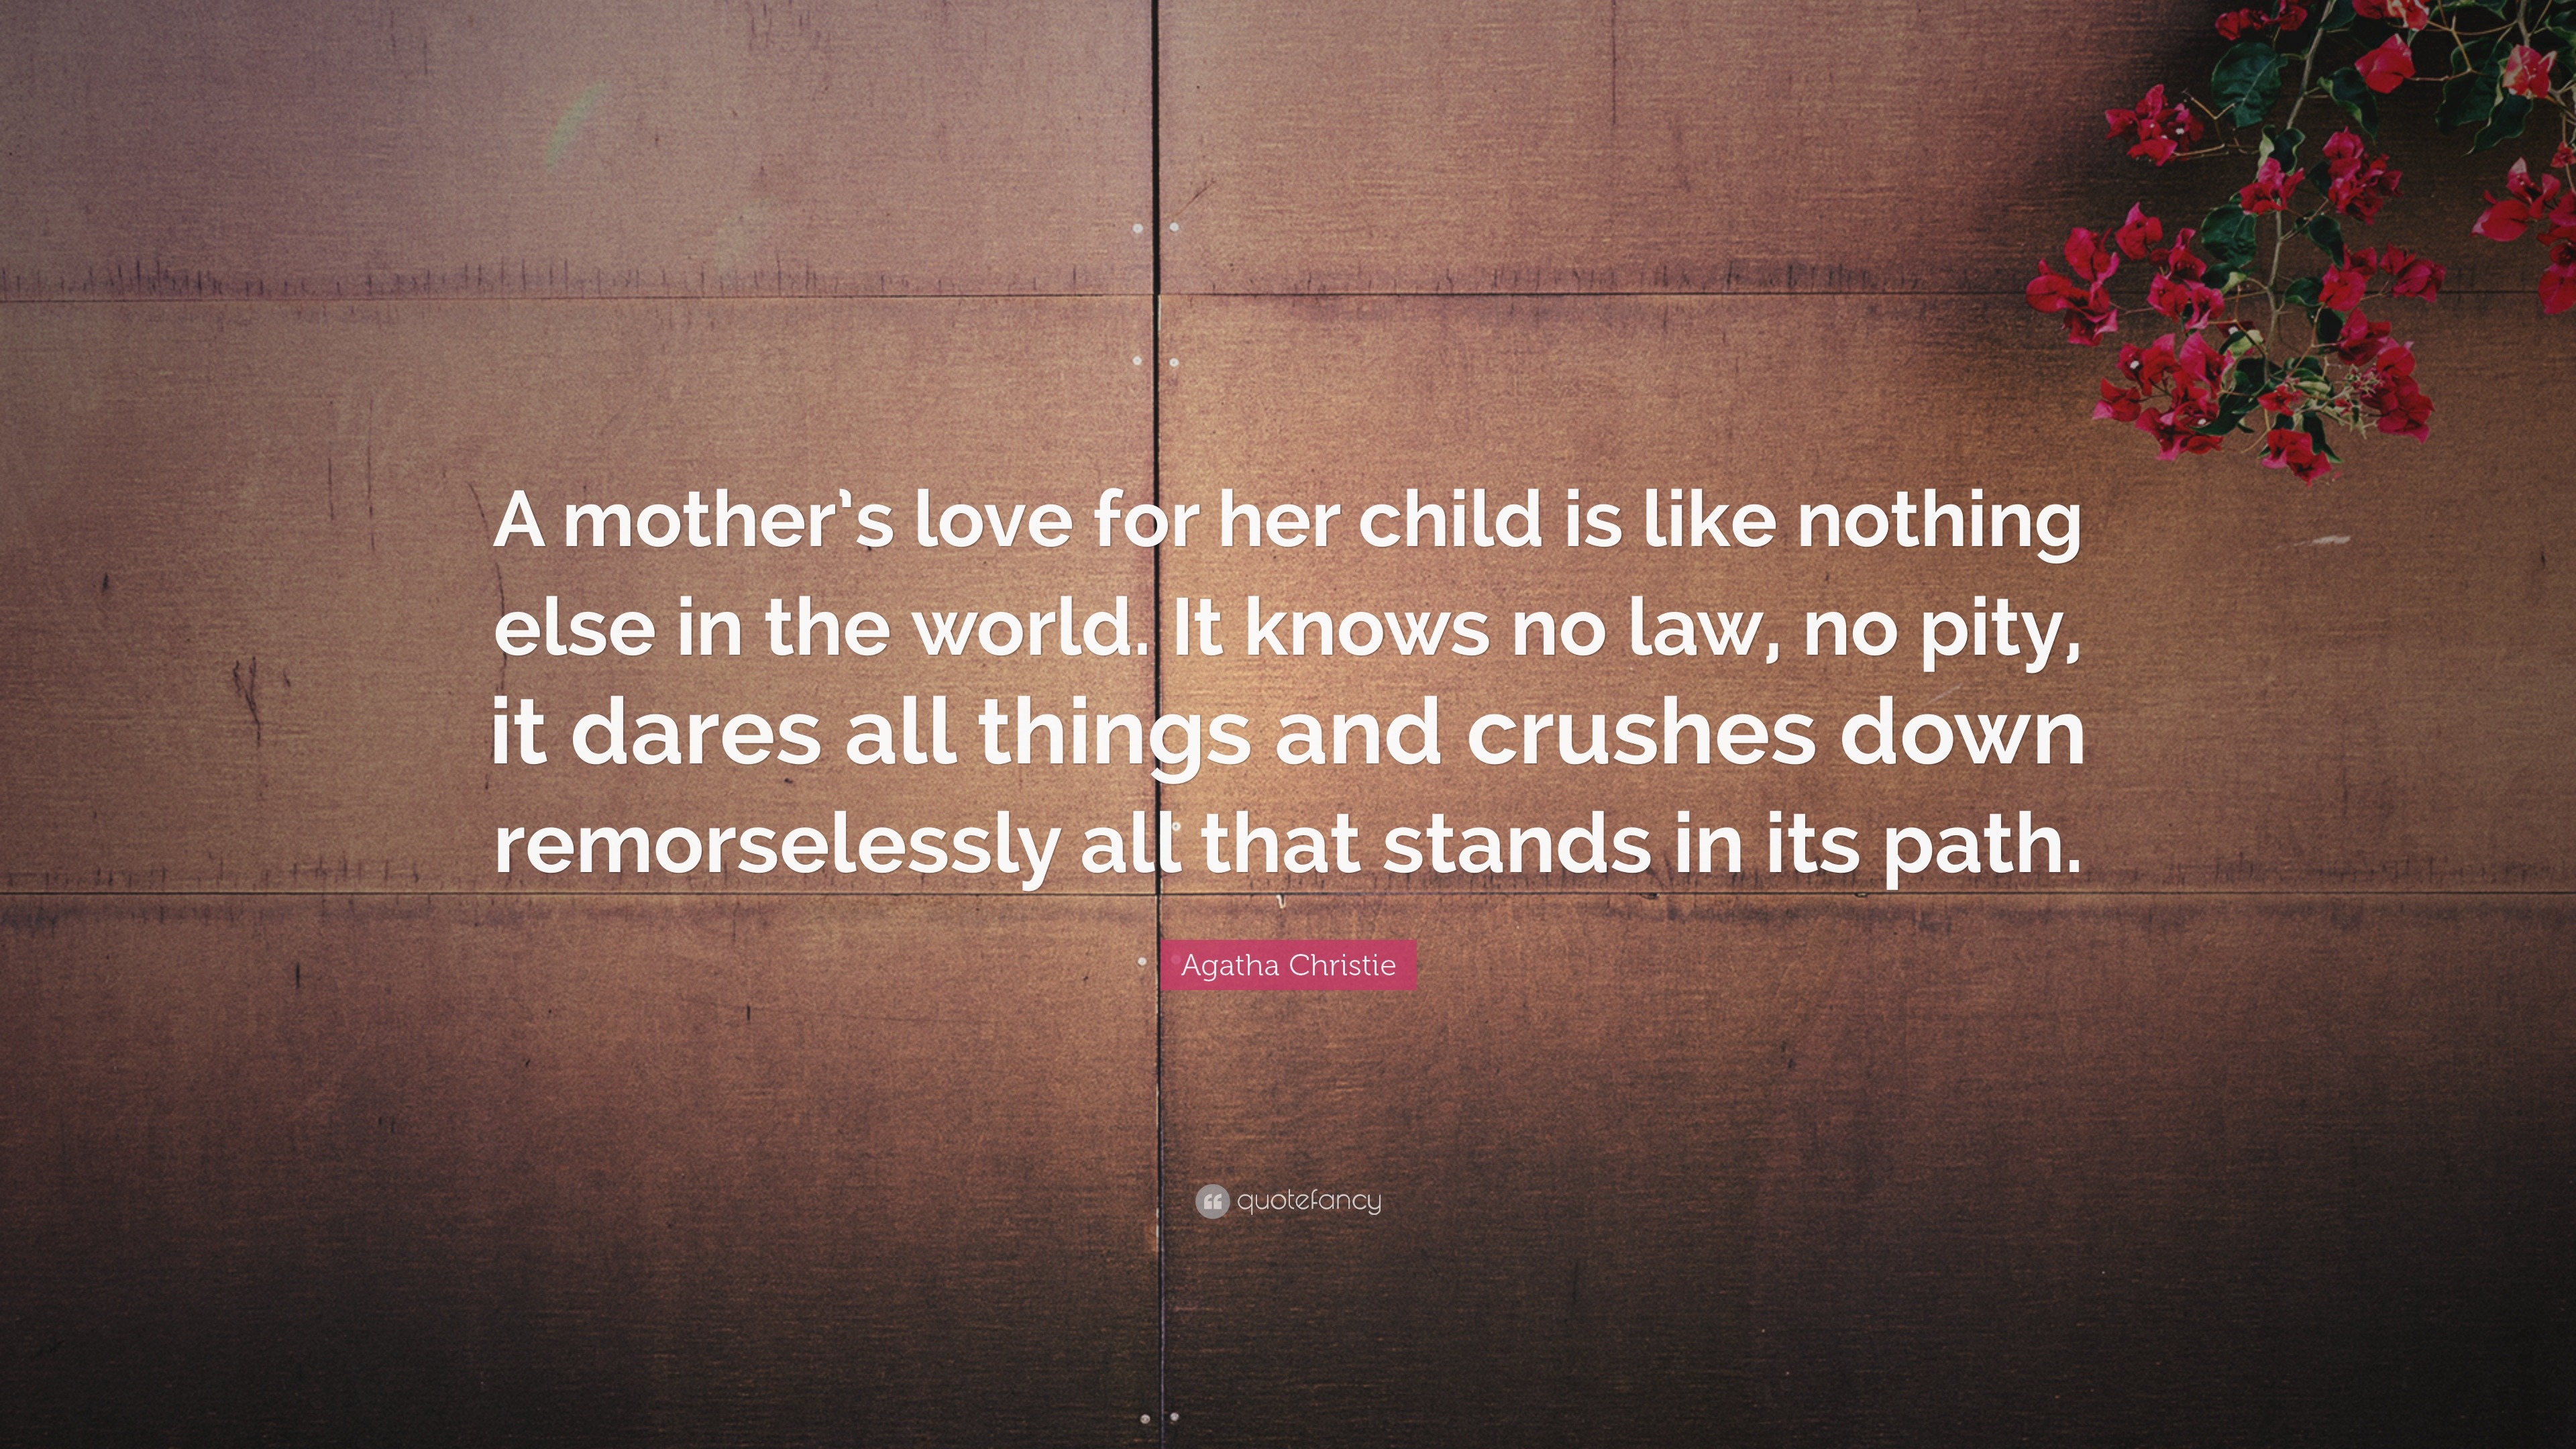 Agatha Christie Quote “A mother s love for her child is like nothing else in